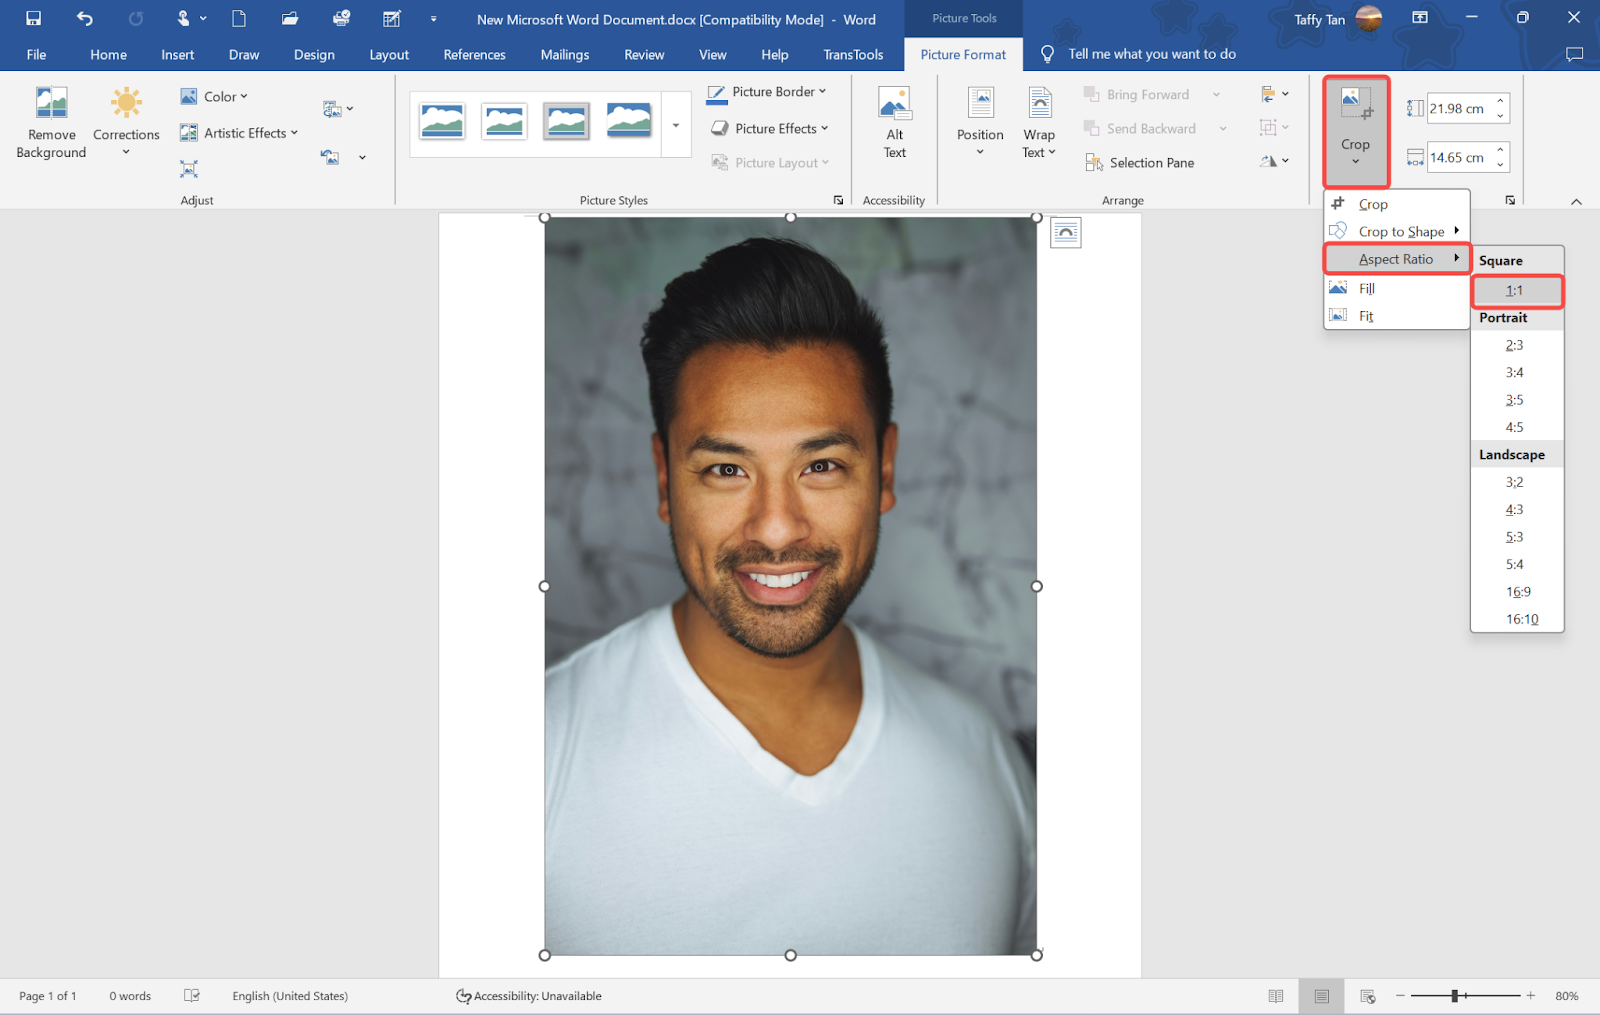 Crop the picture to 1x1 on Microsoft Word